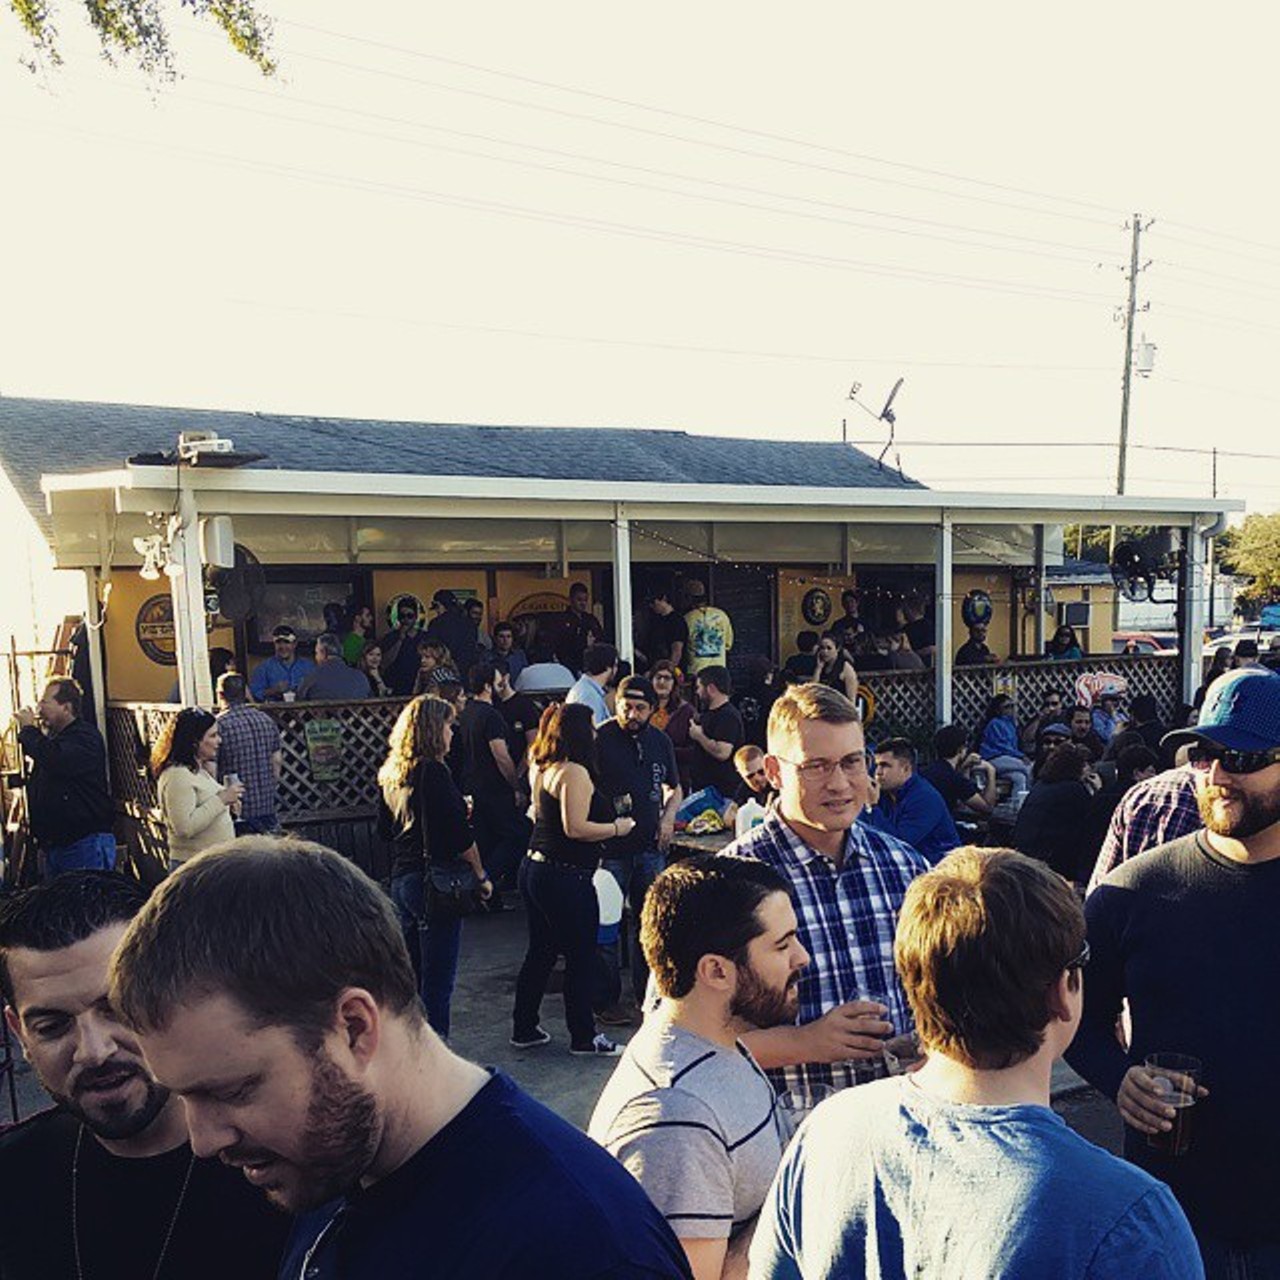 Gnarly Barley
7431 S Orange Ave, Orlando
407-854-4999 
Nosh on a hangover-preventer, like Johnny Mac'n Cheese sandwich, while you down a craft brew on Gnarly Barley's patio. Photo via domevaldez on Instagram.